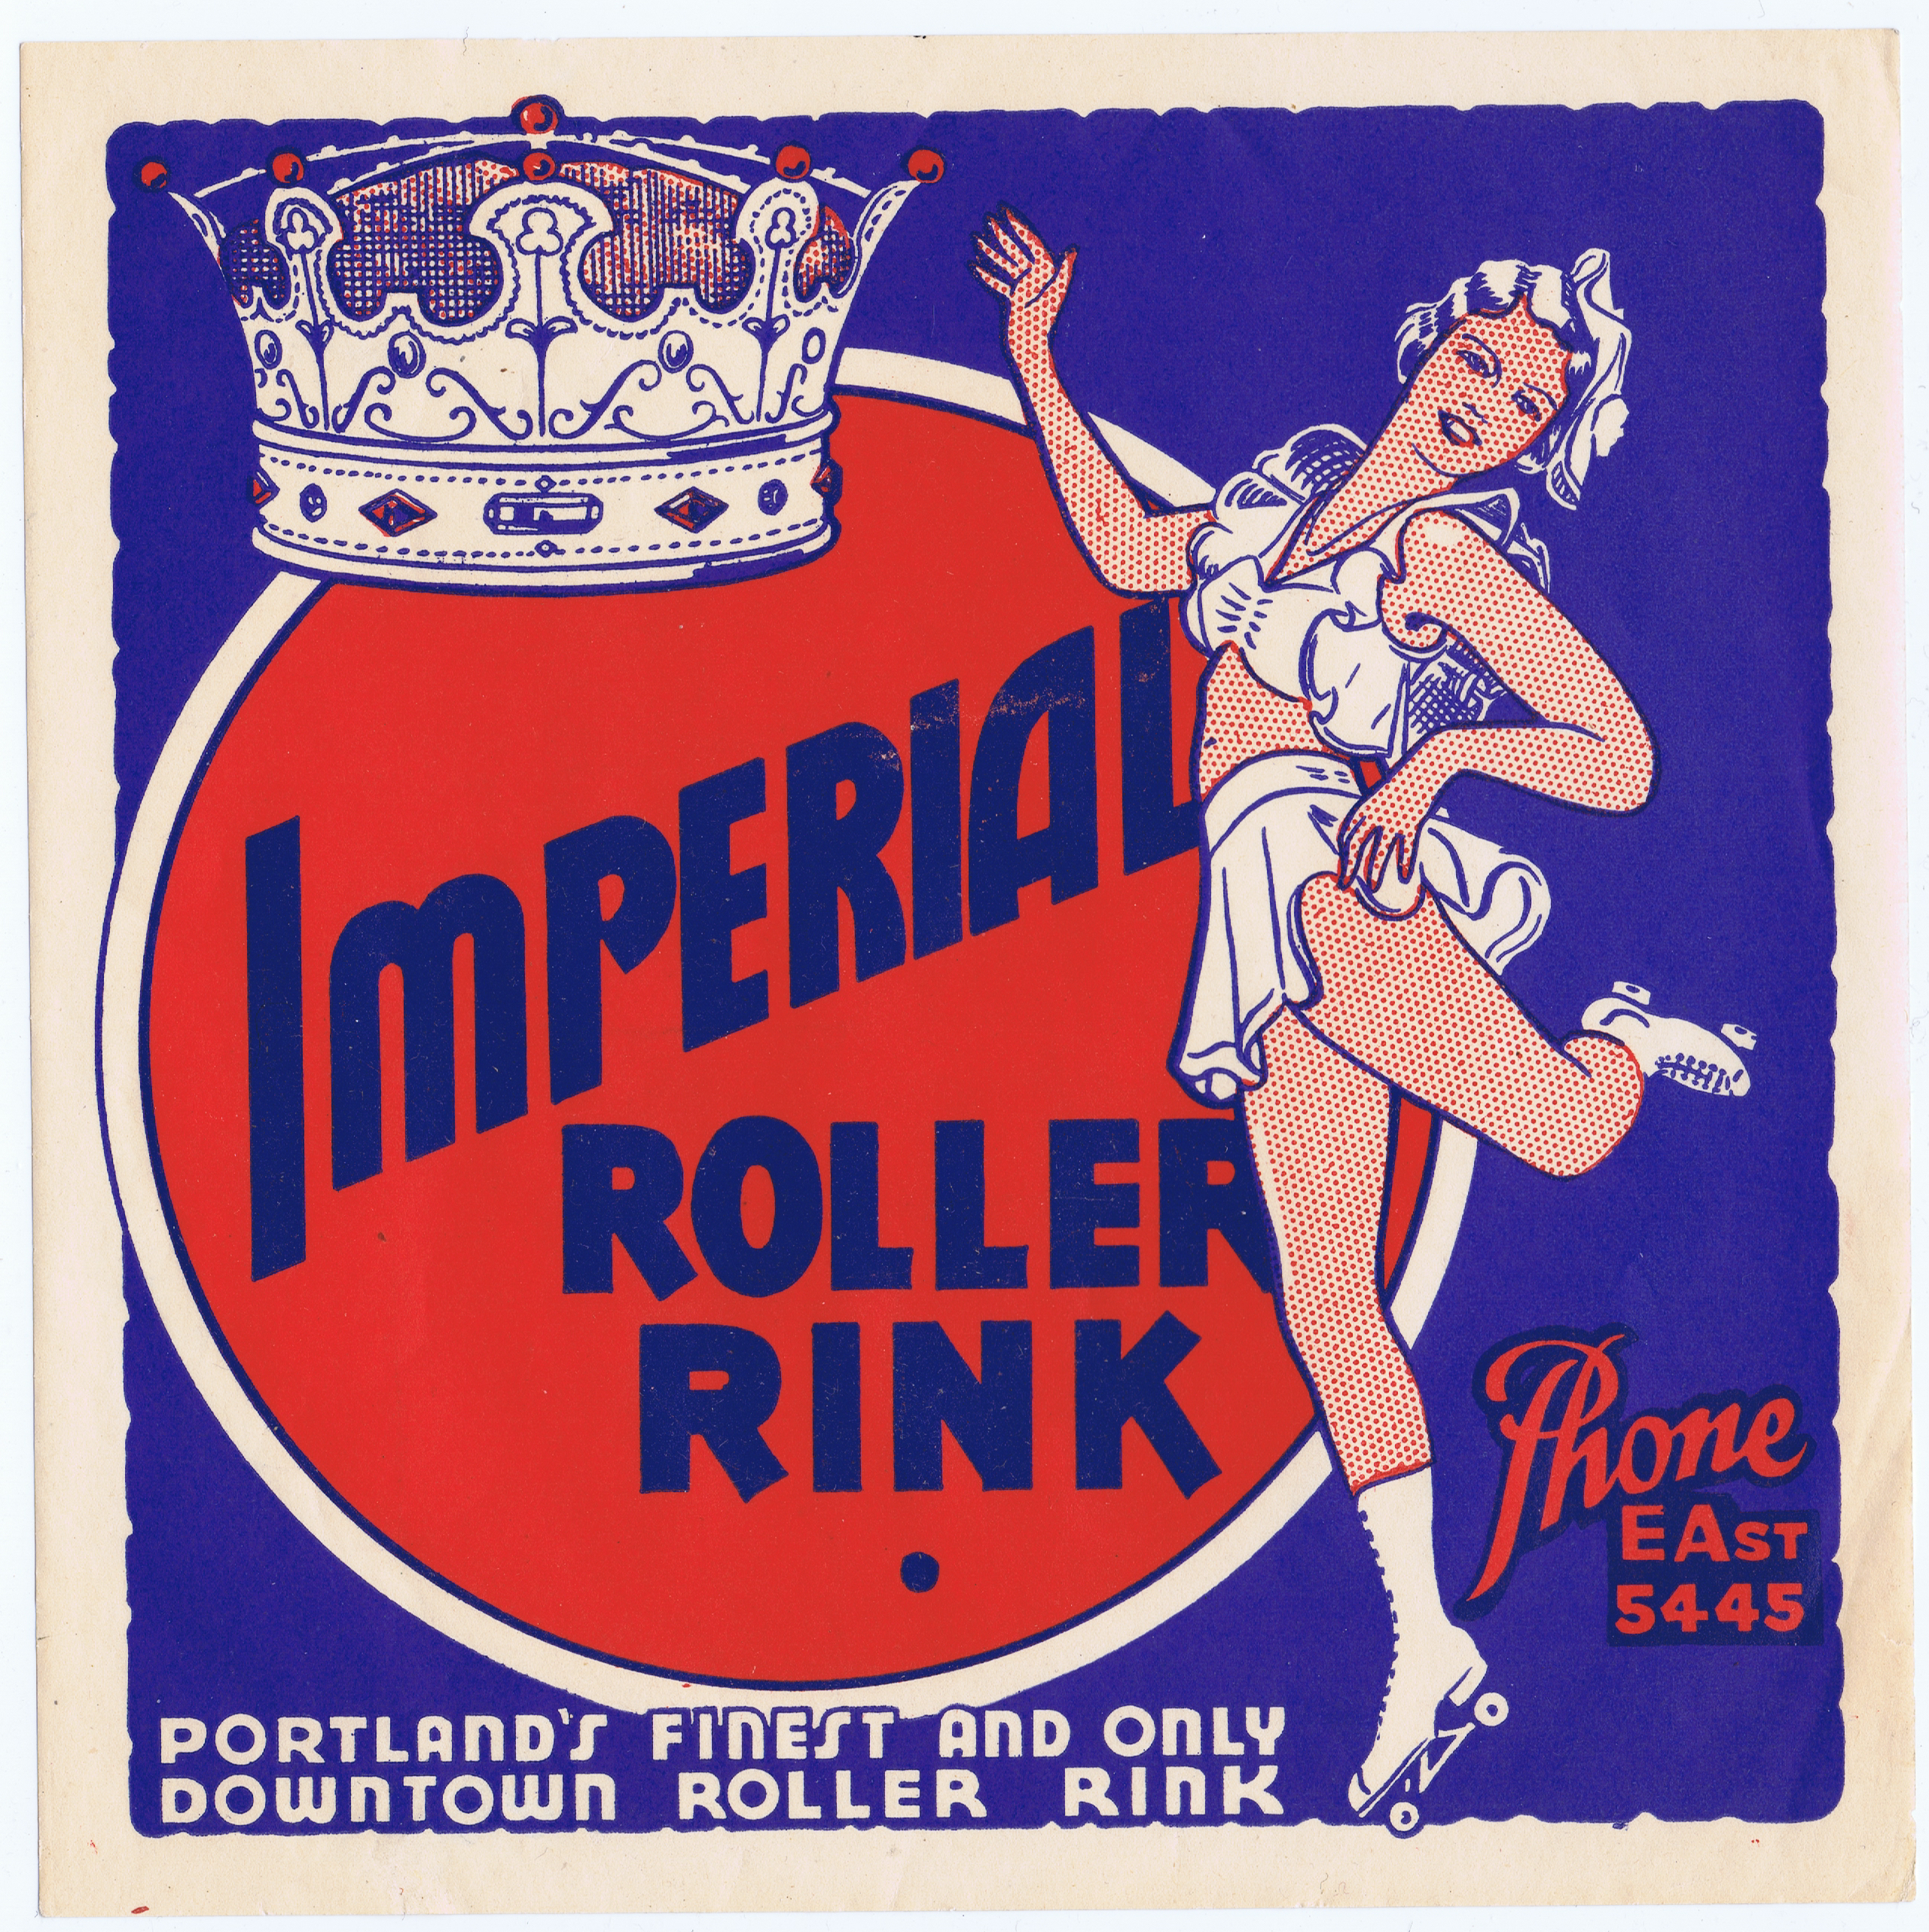 J983	IMPERIAL ROLLER RINK - PORTLAND’S FINEST AND ONLY DOWNTOWN ROLLER RINK